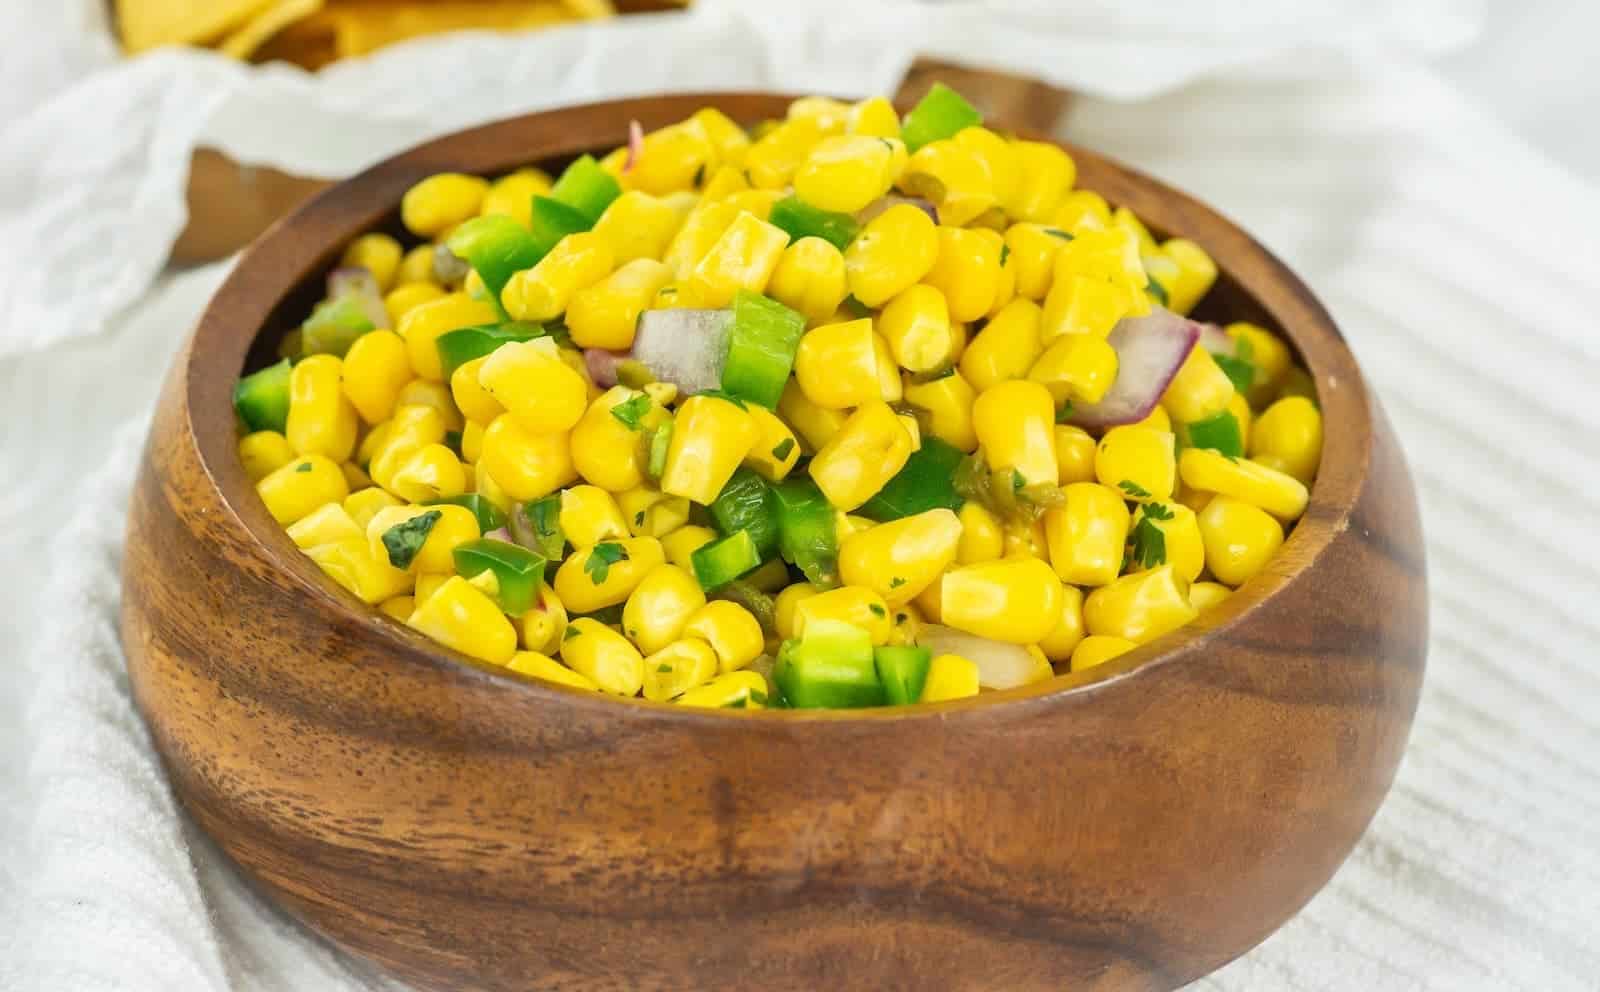 A bowl of corn salsa with diced green peppers and red onions, served in a wooden bowl on a white cloth.